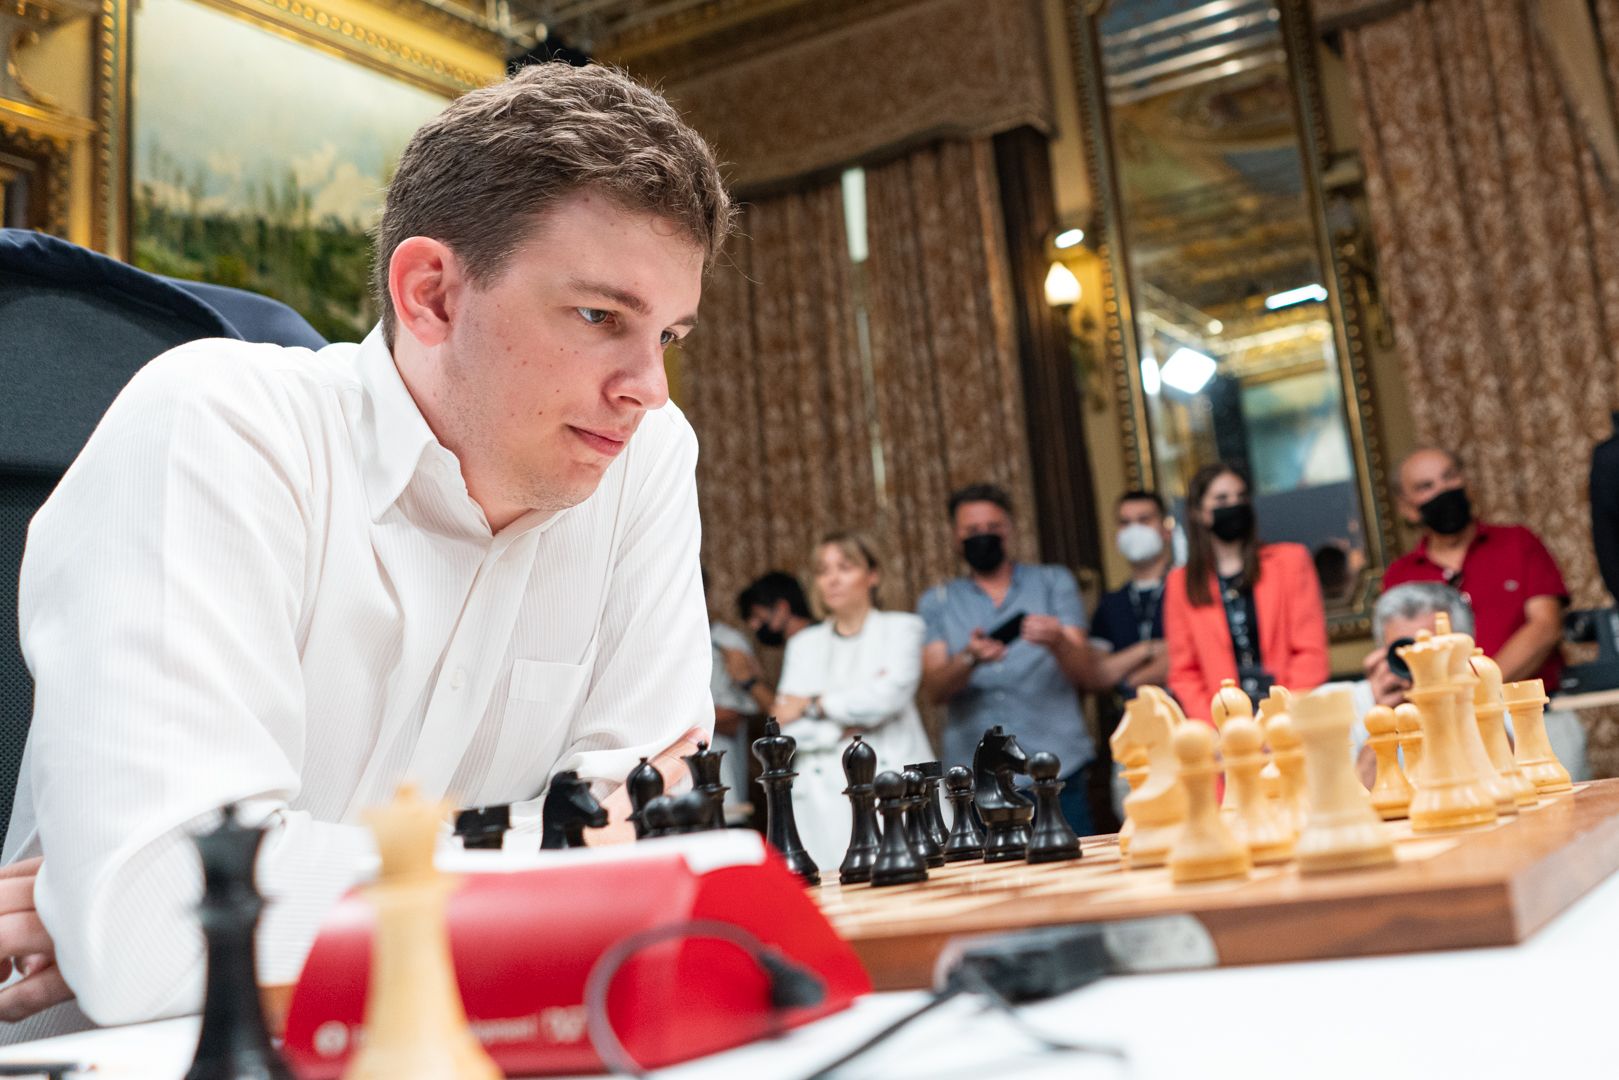 International Chess Federation on X: Ian Nepomniachtchi 🇷🇺 is the winner  of the FIDE Candidates Tournament with a round to spare and a new  Challenger for the world championship against Magnus Carlsen.